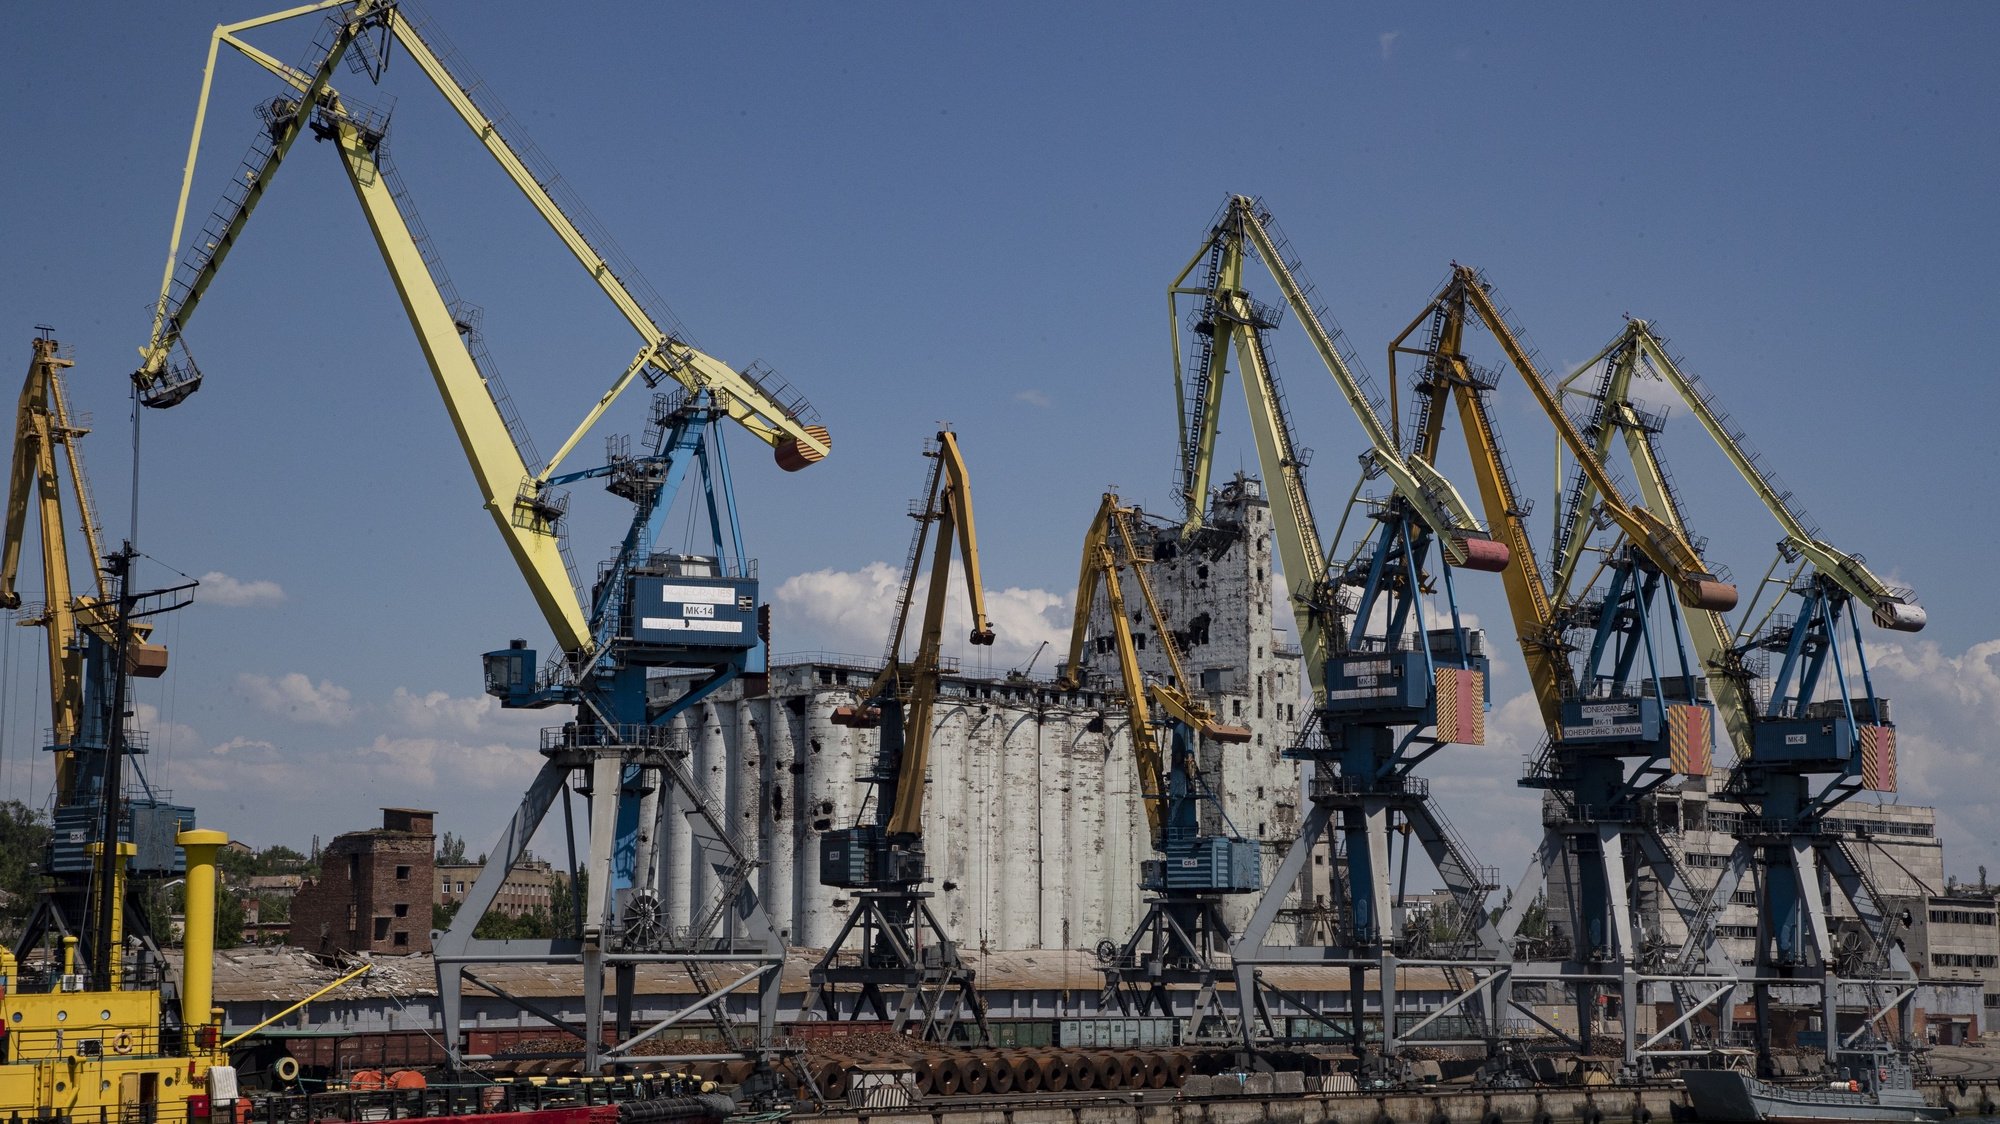 epa10009881 A picture taken during a visit to Mariupol organized by the Russian military shows Russian ships moored at a pier in front of destroyed granary in the cargo sea port of Mariupol, Ukraine, 12 June 2022. Russian Defense Minister Sergei Shoigu said the seaports of Mariupol and Berdyansk in Ukraine are operating normally and are ready to ship grain.  According to Shoigu, demining of the Mariupol seaport has been completed and it is functioning normally and has received the first cargo ships. Shoigu added ‘In Mariupol, water and electricity supply to residential areas are gradually being restored, streets are being cleared, the first social facilities have begun to function.’ On 24 February Russian troops entered Ukrainian territory starting a conflict that has provoked destruction and a humanitarian crisis. According to the UNHCR, more than six million refugees have fled Ukraine, and a further 7.7 million people have been displaced internally within Ukraine since.  EPA/SERGEI ILNITSKY